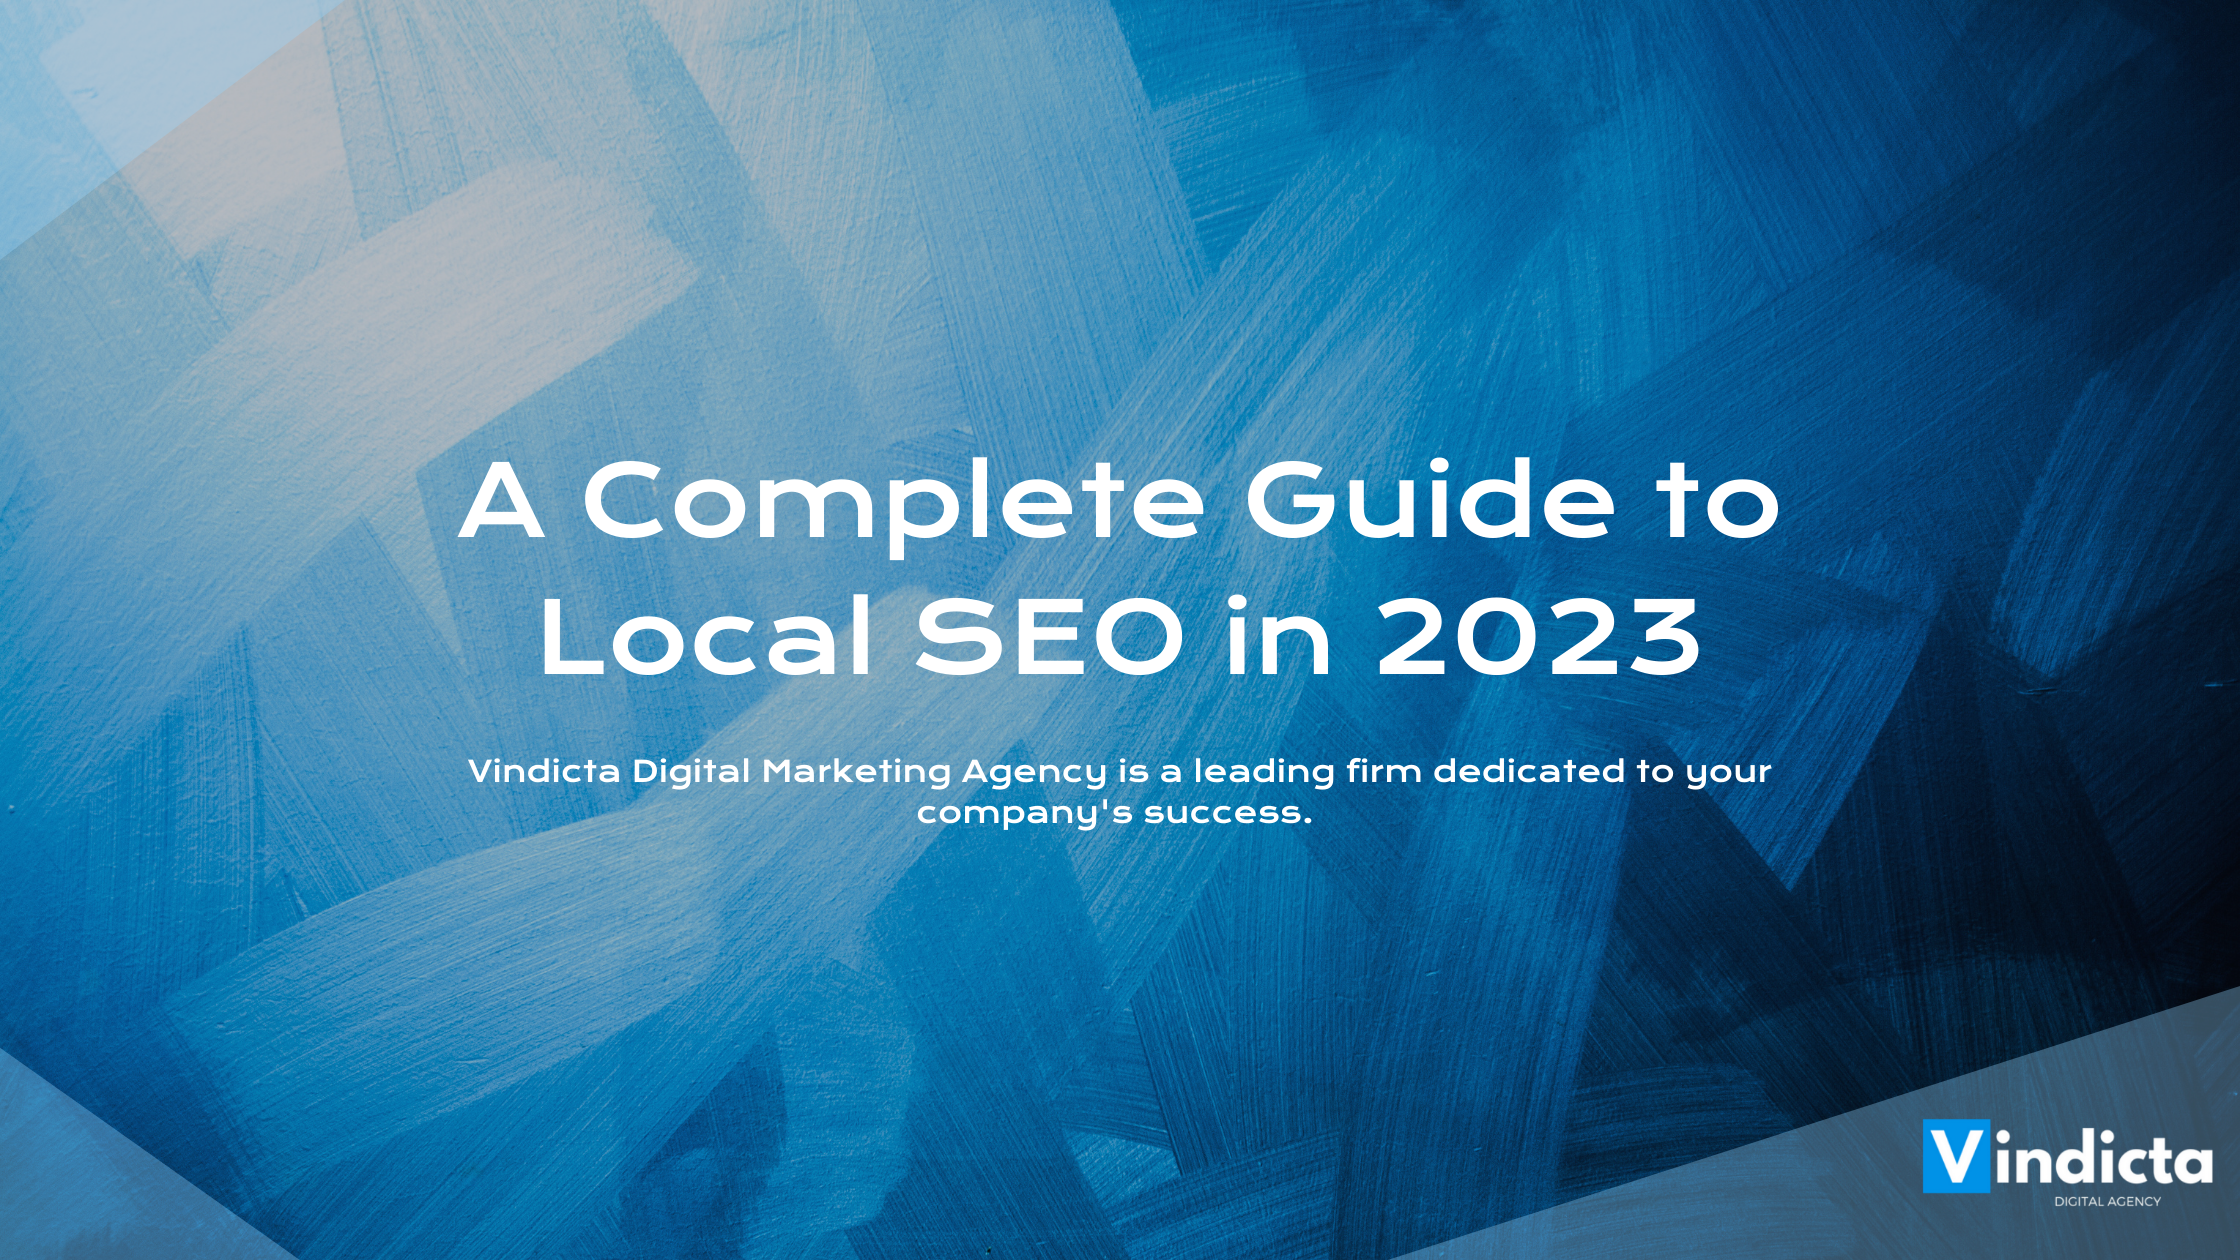 A Complete Guide to Local SEO in 2023